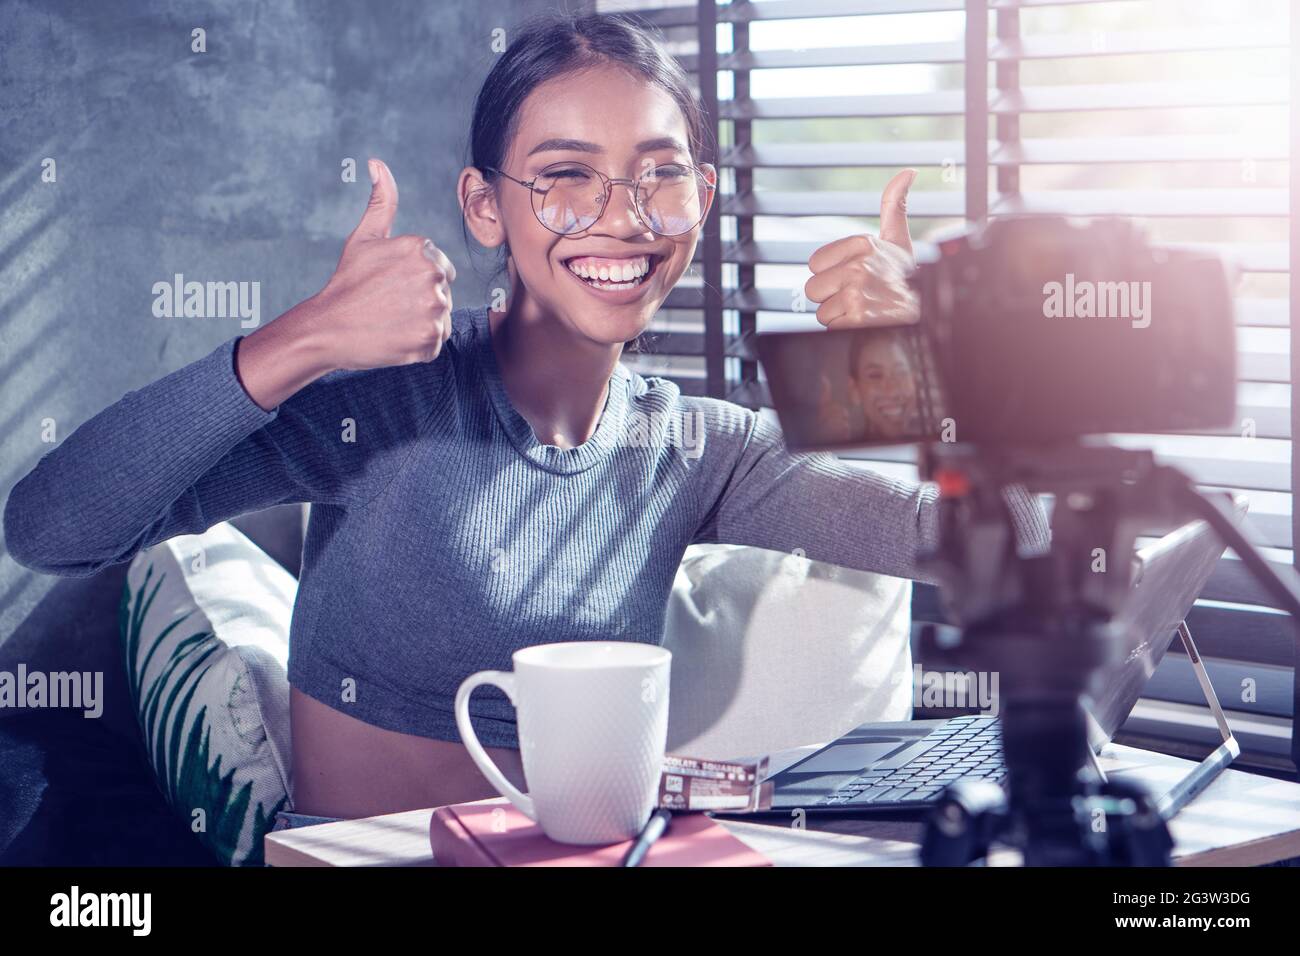 Young smiling woman vlogger showing thumbs up while recording her daily video blog Stock Photo